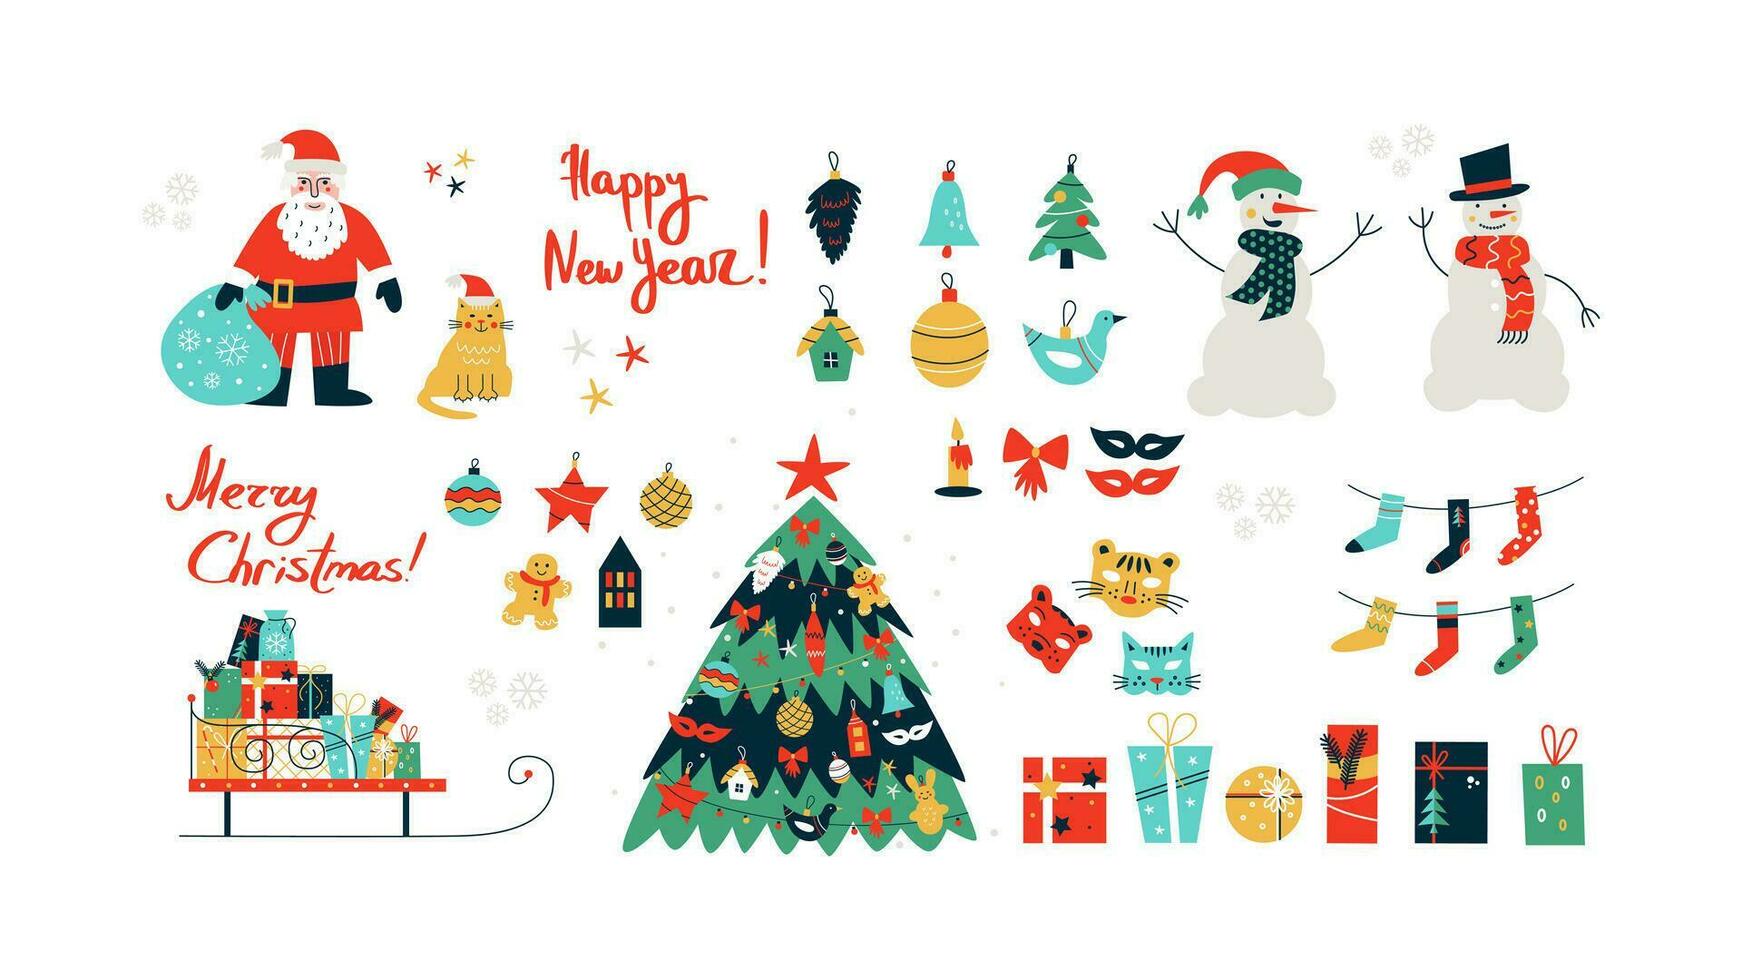 Vector illustration with cute Christmas set. Hand written Happy New Year and Merry Christmas. Bright colors design.